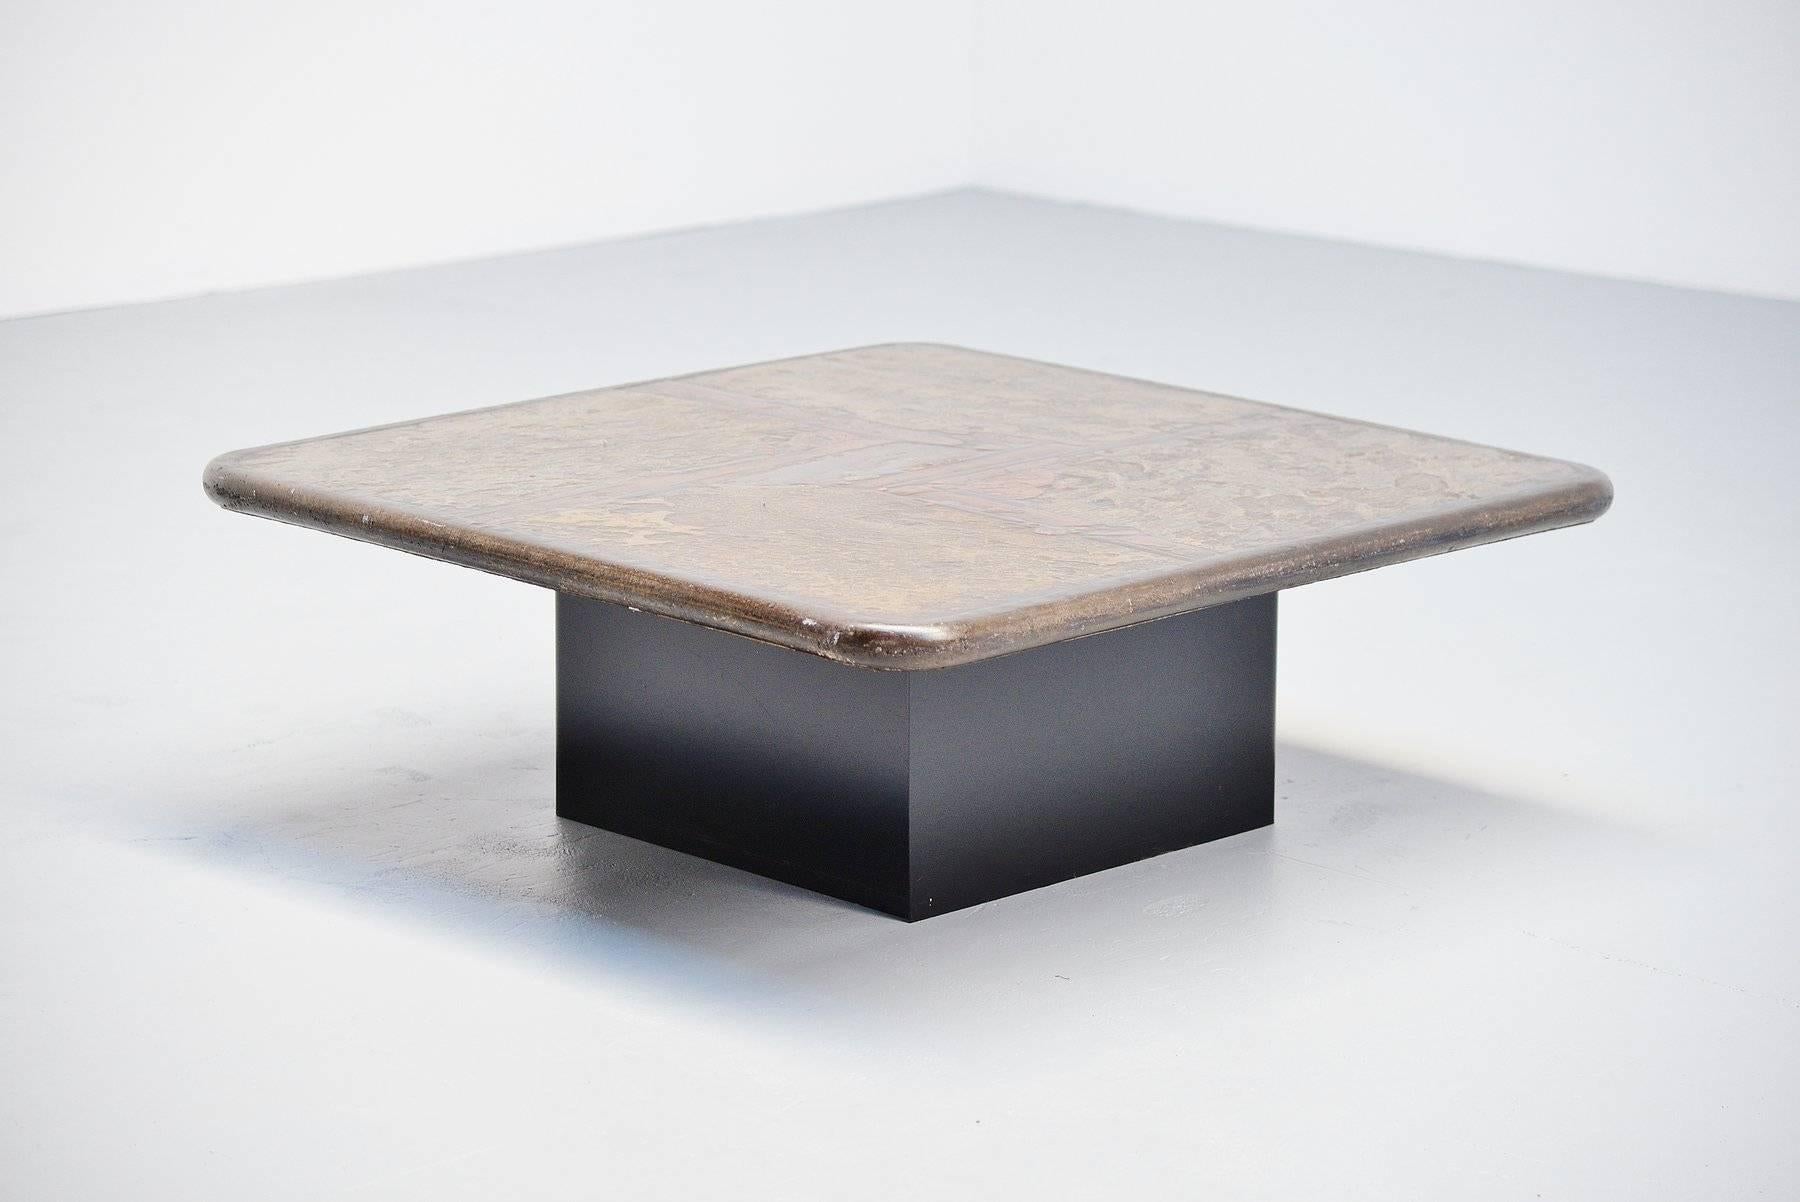 Very nice one off square shaped coffee table designed and made by Paul Kingma, Holland 1988. Paul Kingma was well known for his architectural tables that pay a tribute to the riches of Nature by travelling extensively in search of rare materials,